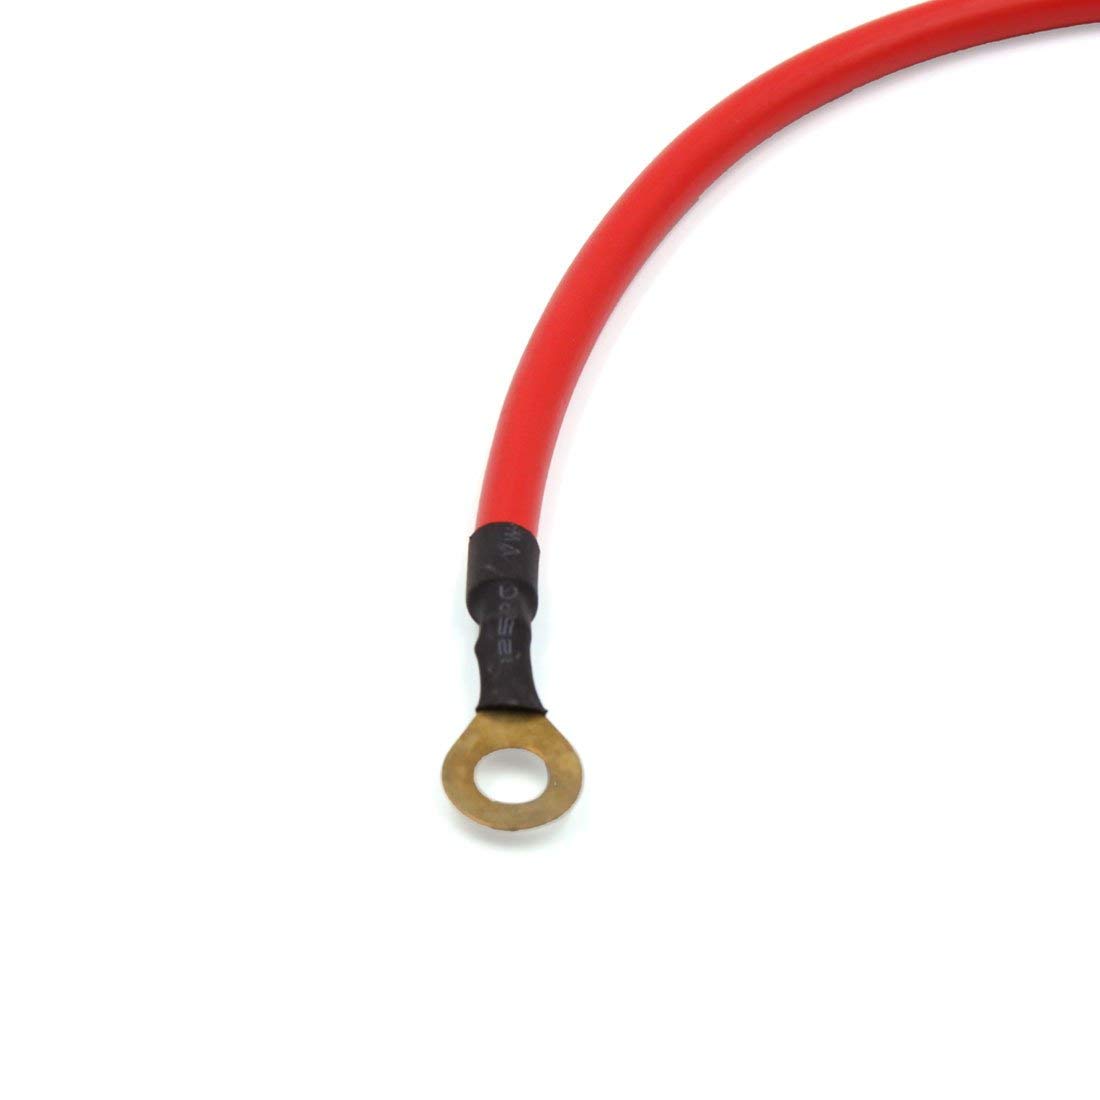 X Autohaux 27cm 42cm 45cm DC 12V 24V Red Car Battery Ground Wire Electric Conduction Stable Voltage Cable Transfer Cable